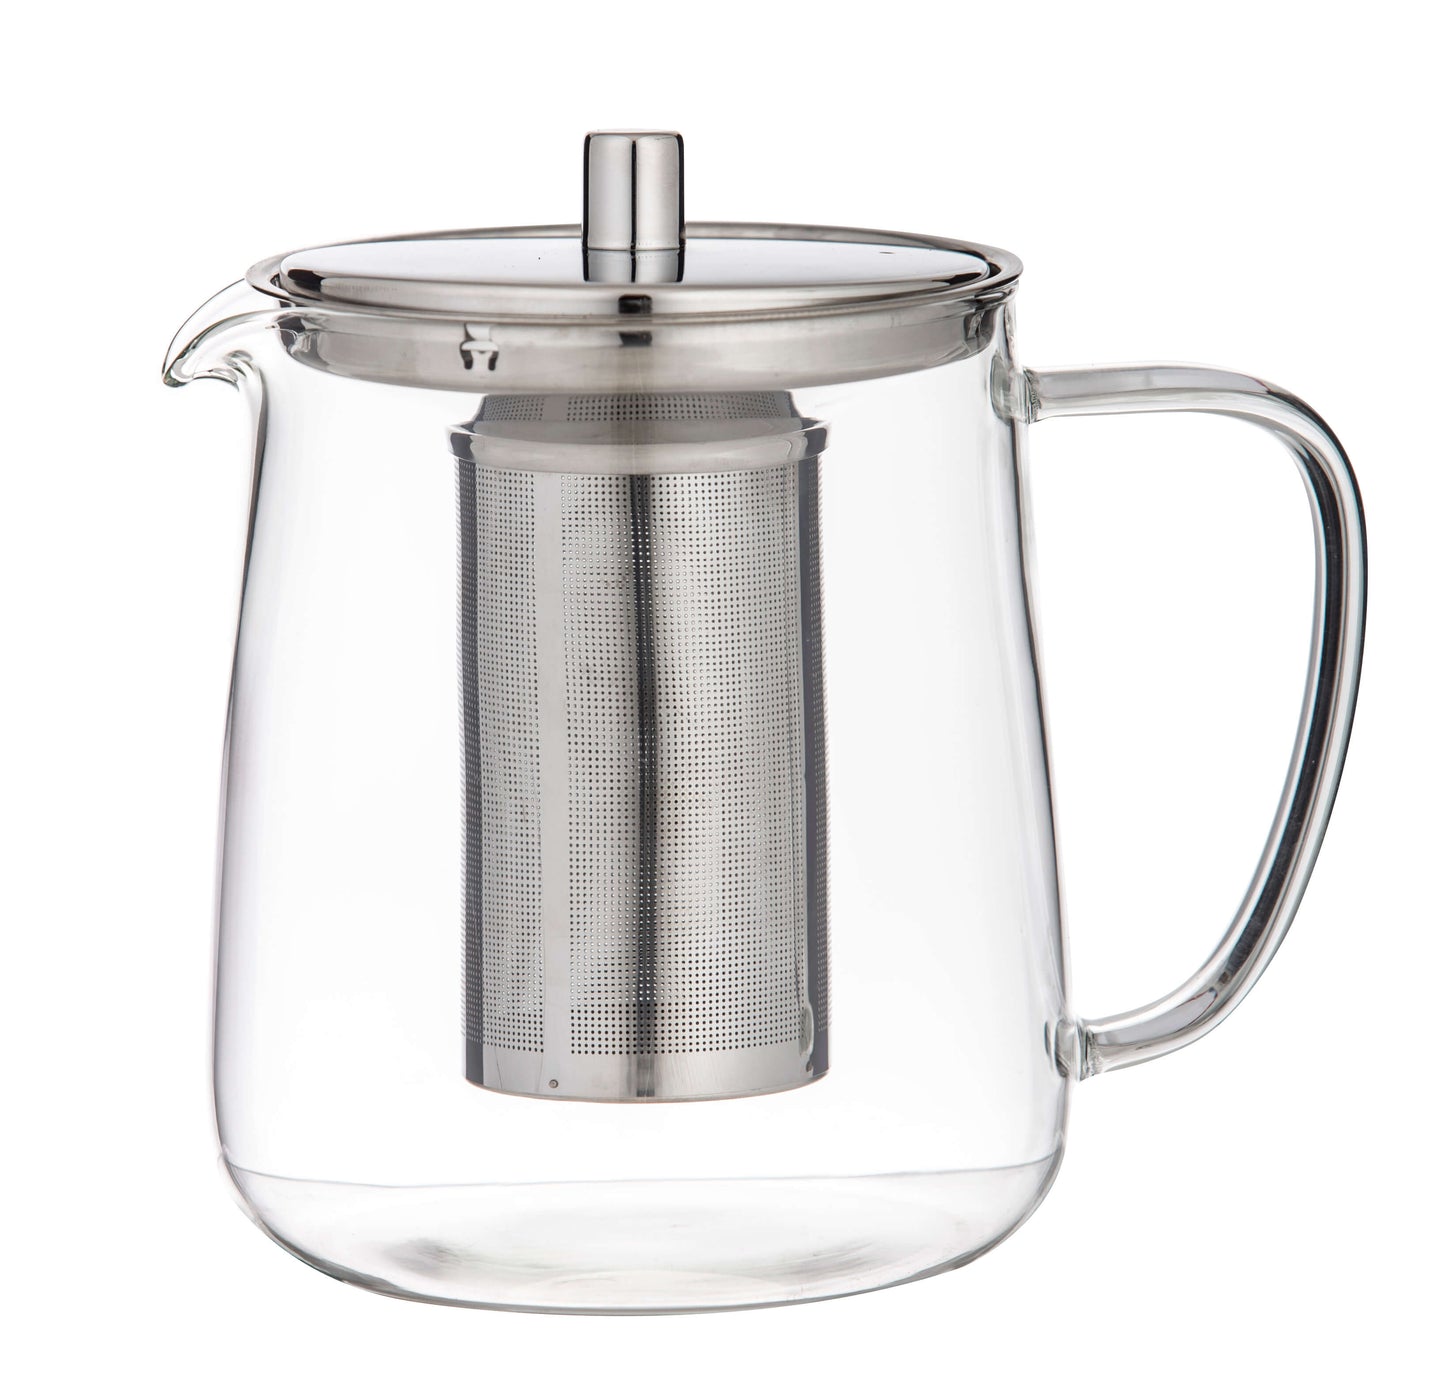 Leaf & Bean Oslo Glass Teapot with Stainless Steel Infuser 1L